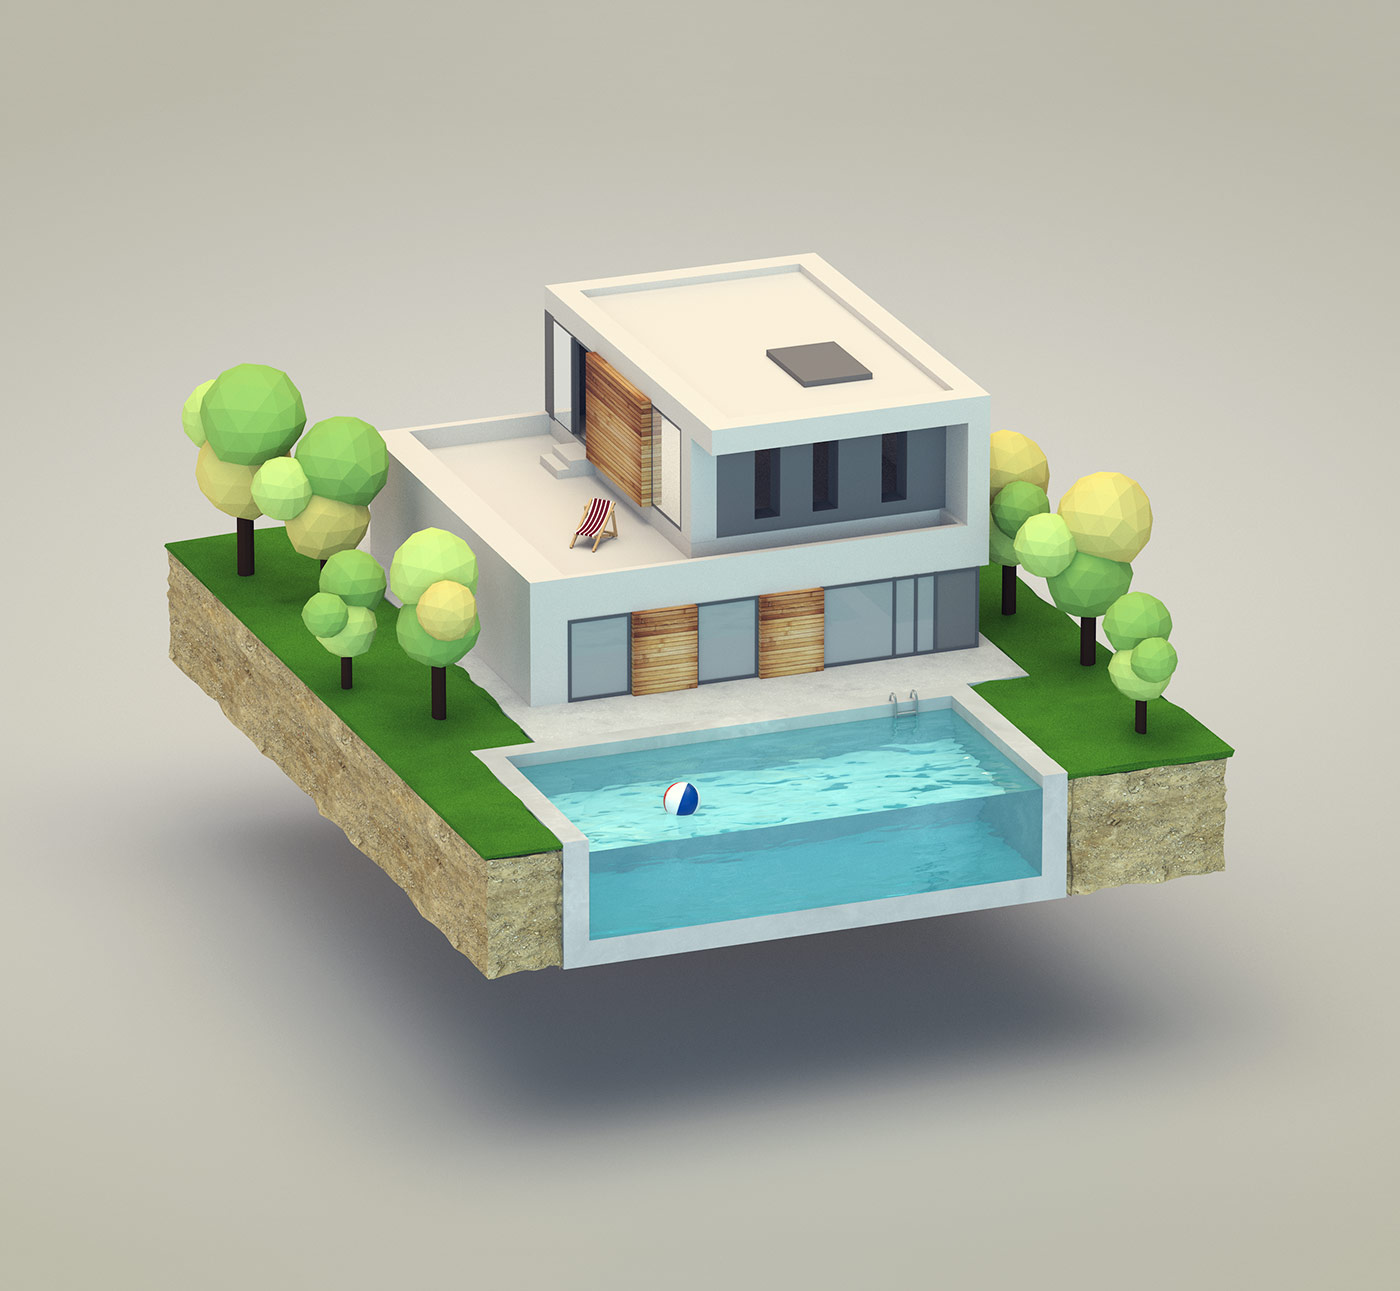 Low-Poly House in C4D